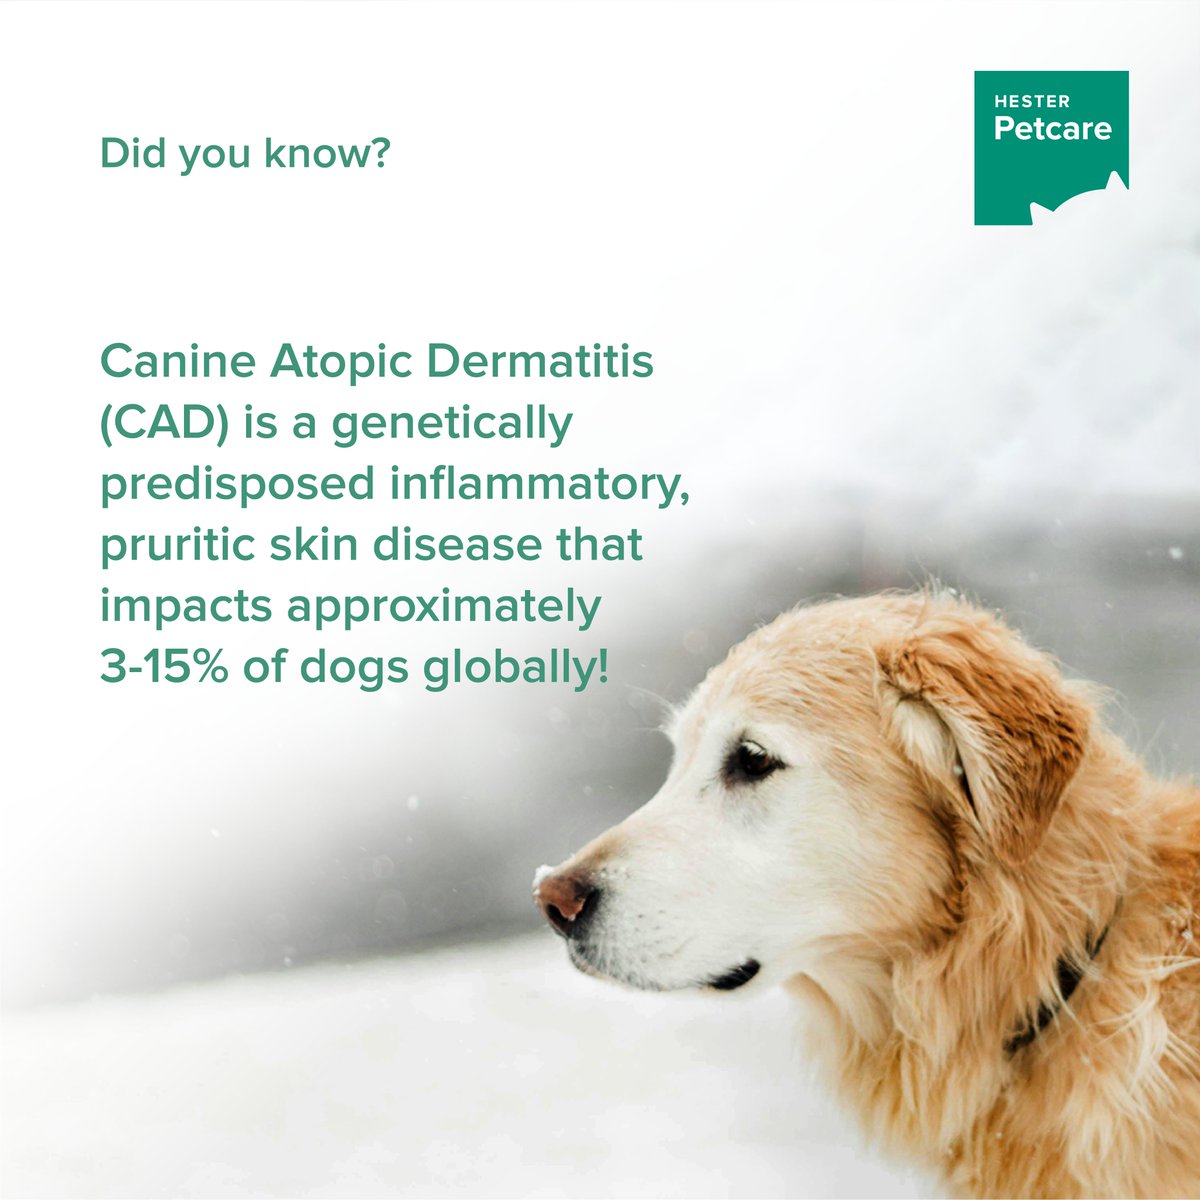 Canine atopic dermatitis is caused by a reaction to environmental allergens like pollen, environmental mites, molds, etc. While CAD is a lifelong condition, effective treatment strategies can still help your pet maintain a high quality of life.

#Hester #canineatopicdermatitis